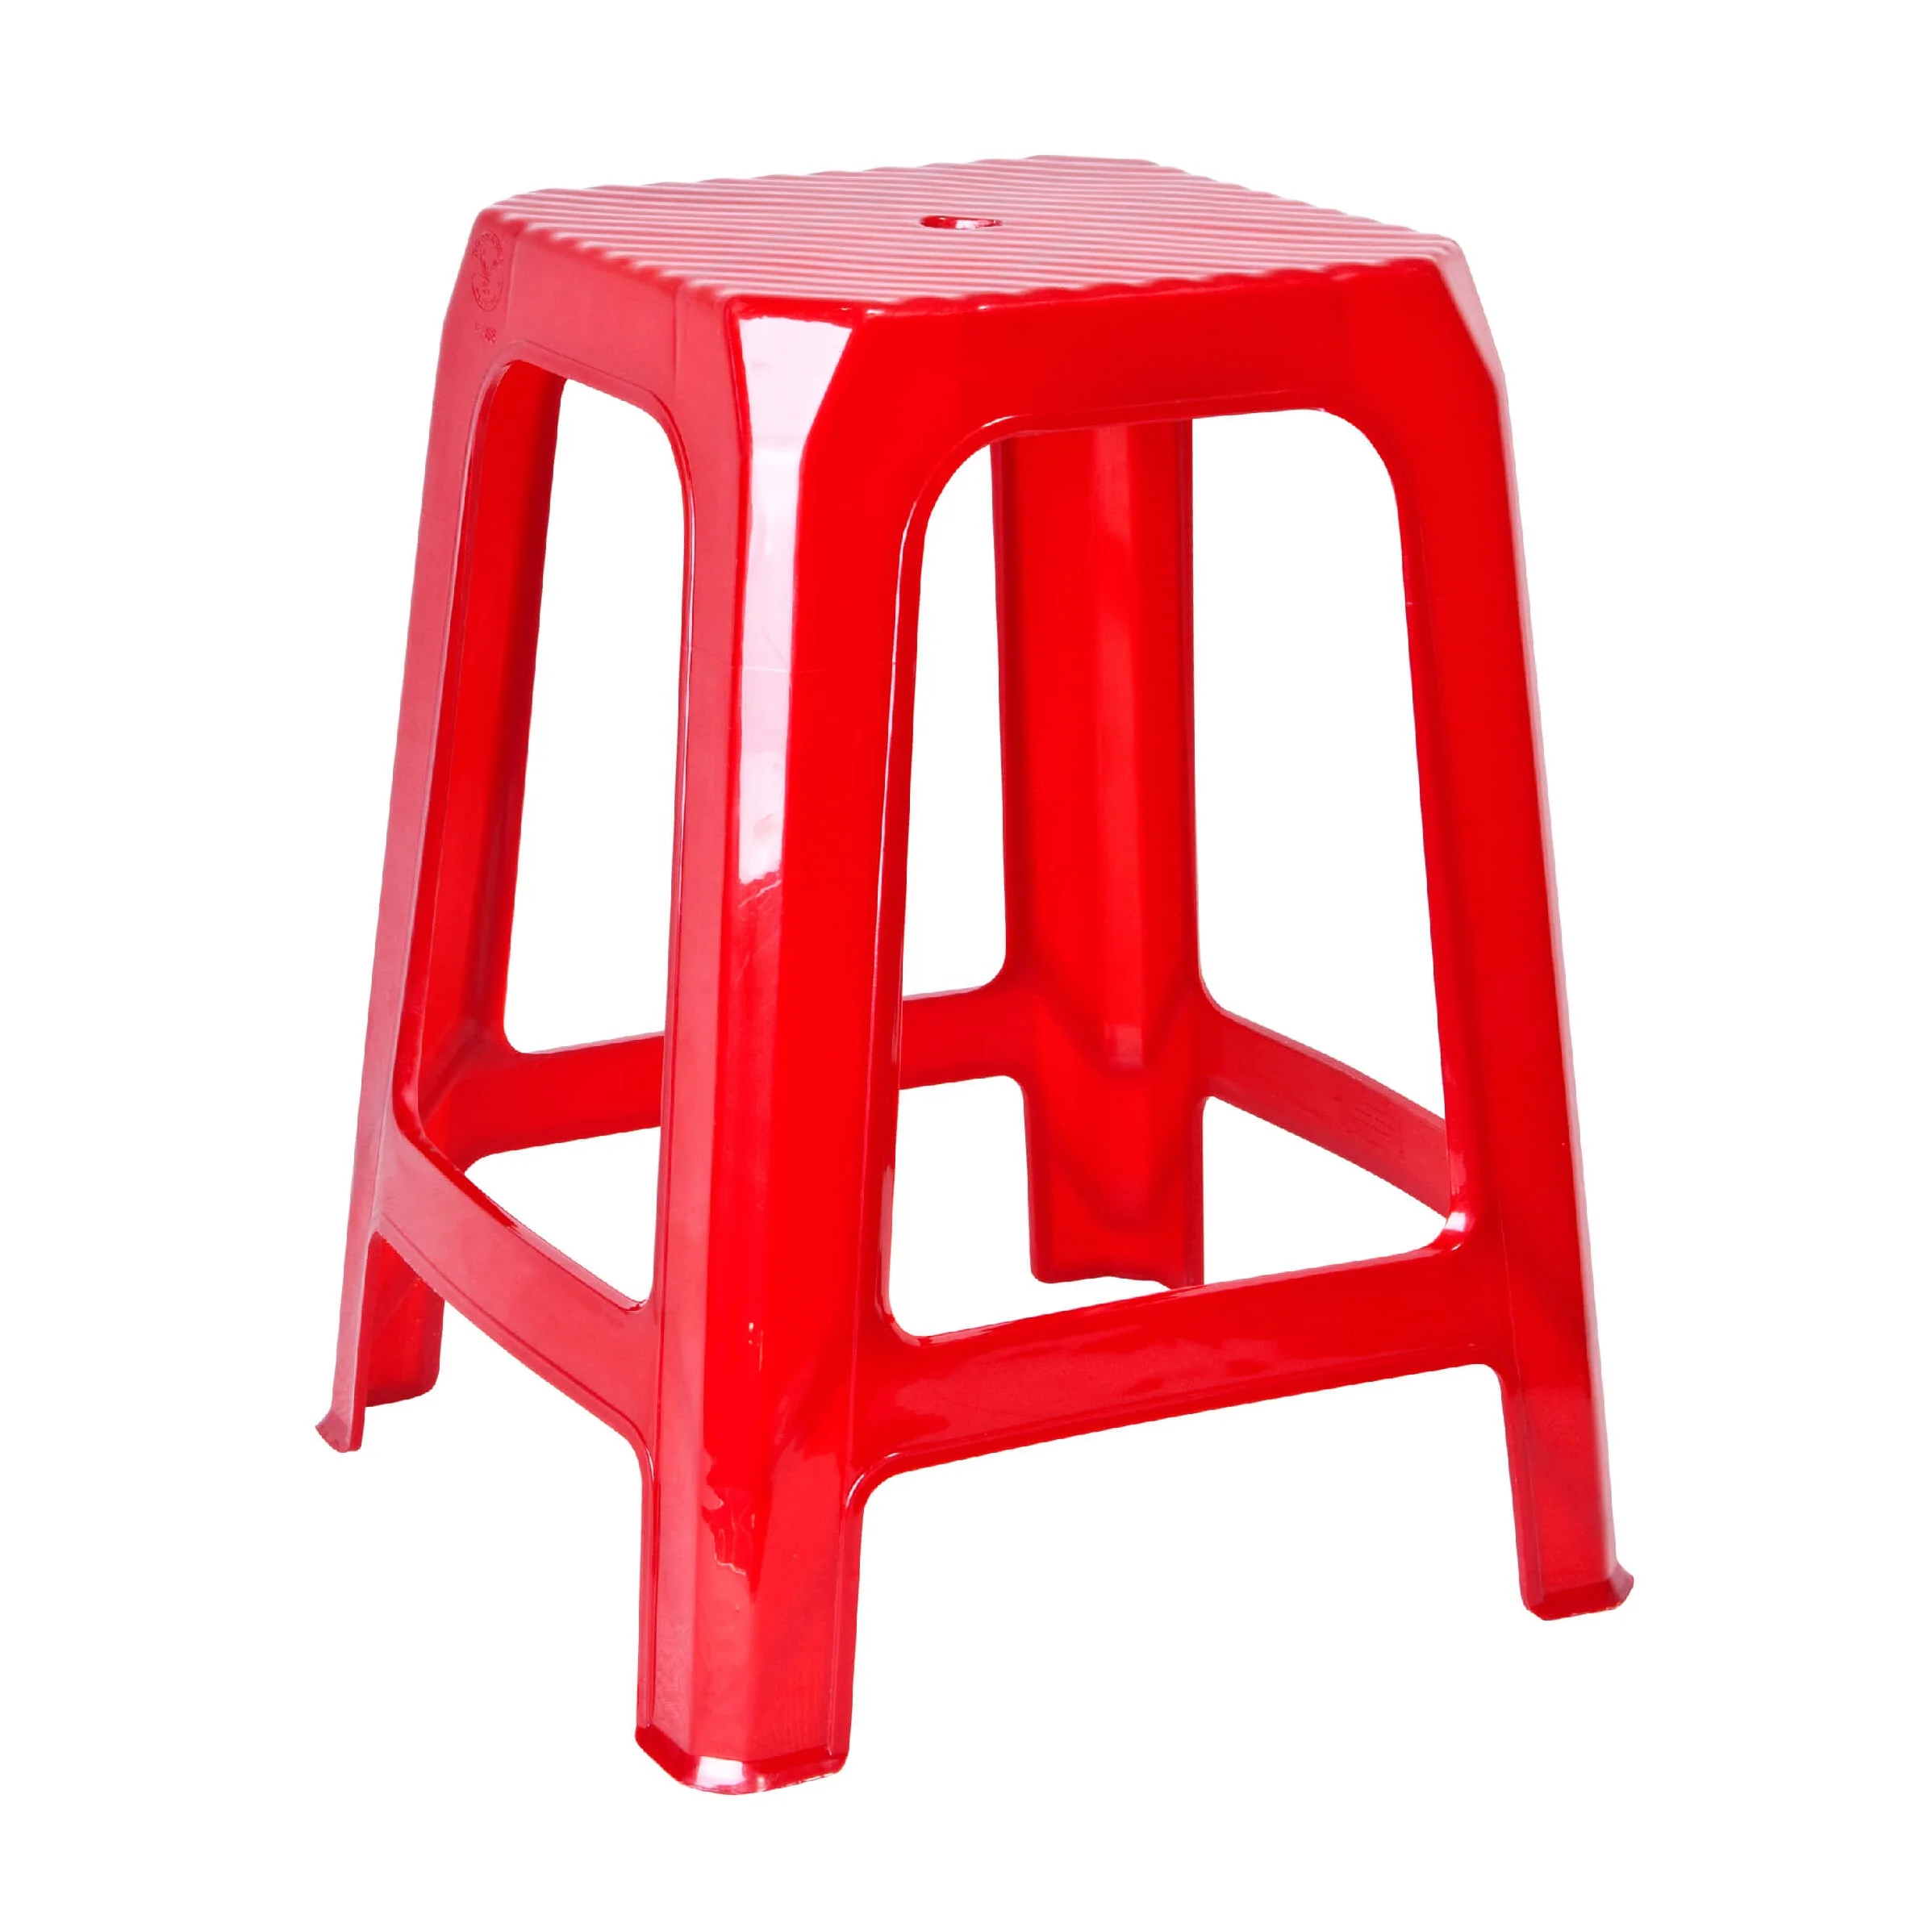 Plastic Stool Chair - Stools Chairs